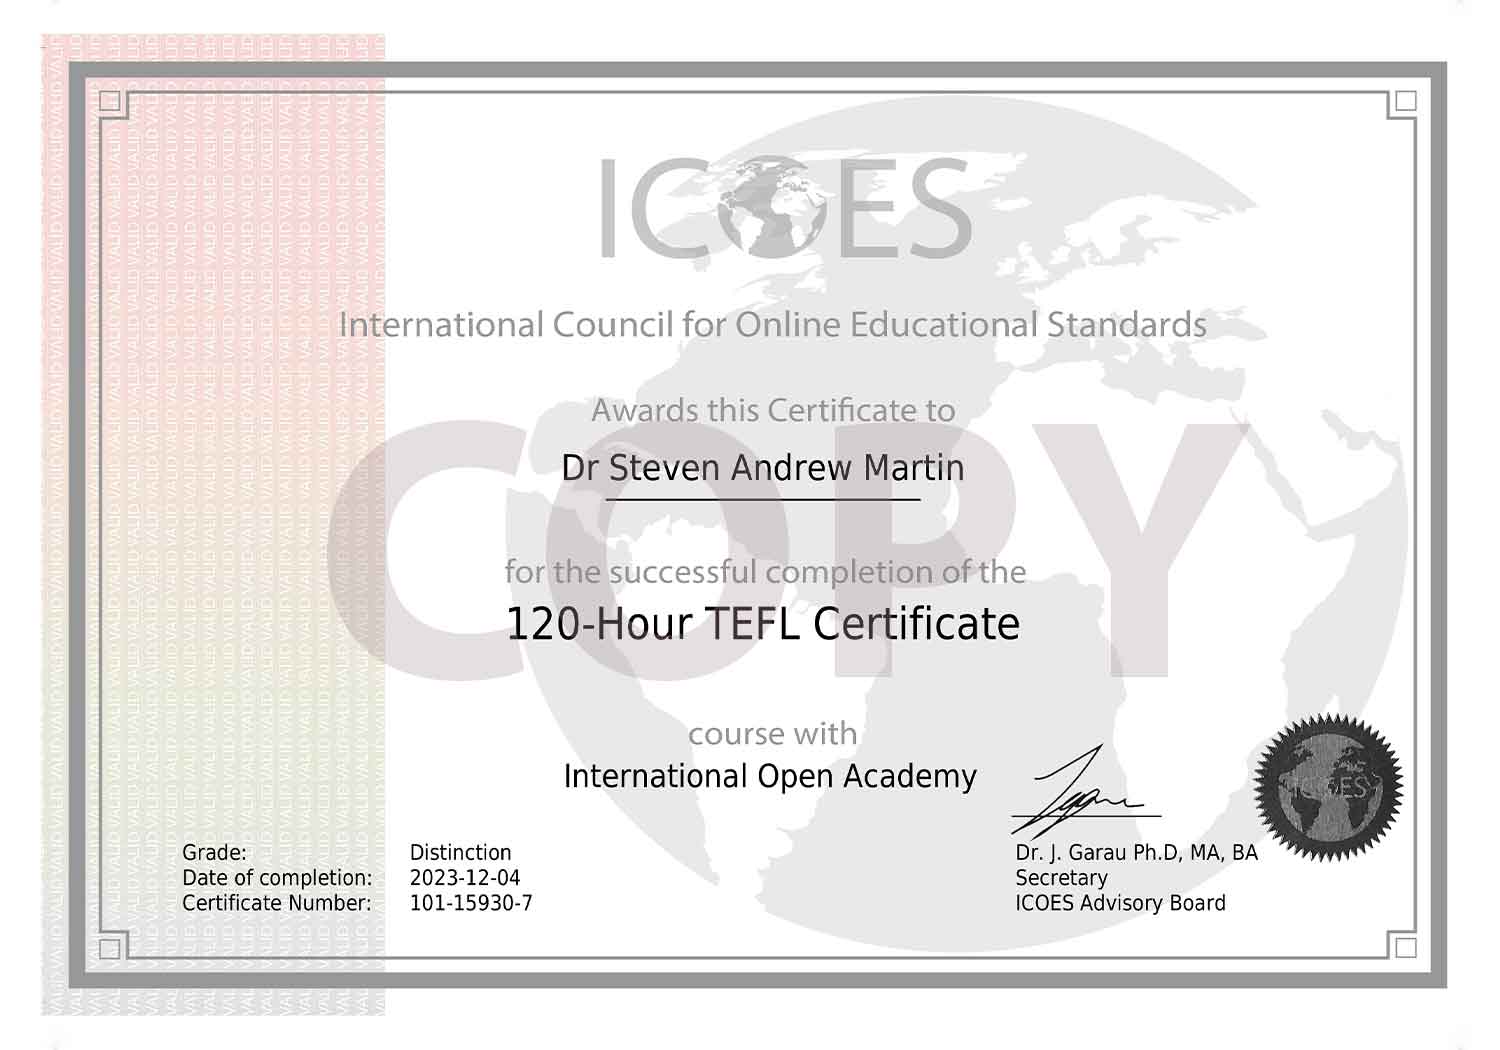 TEFL 120 Hour Certificate | International Council for Online Educational Standards | ICOES | Dr Steven Andrew Martin | Teaching English as a Foreign Language